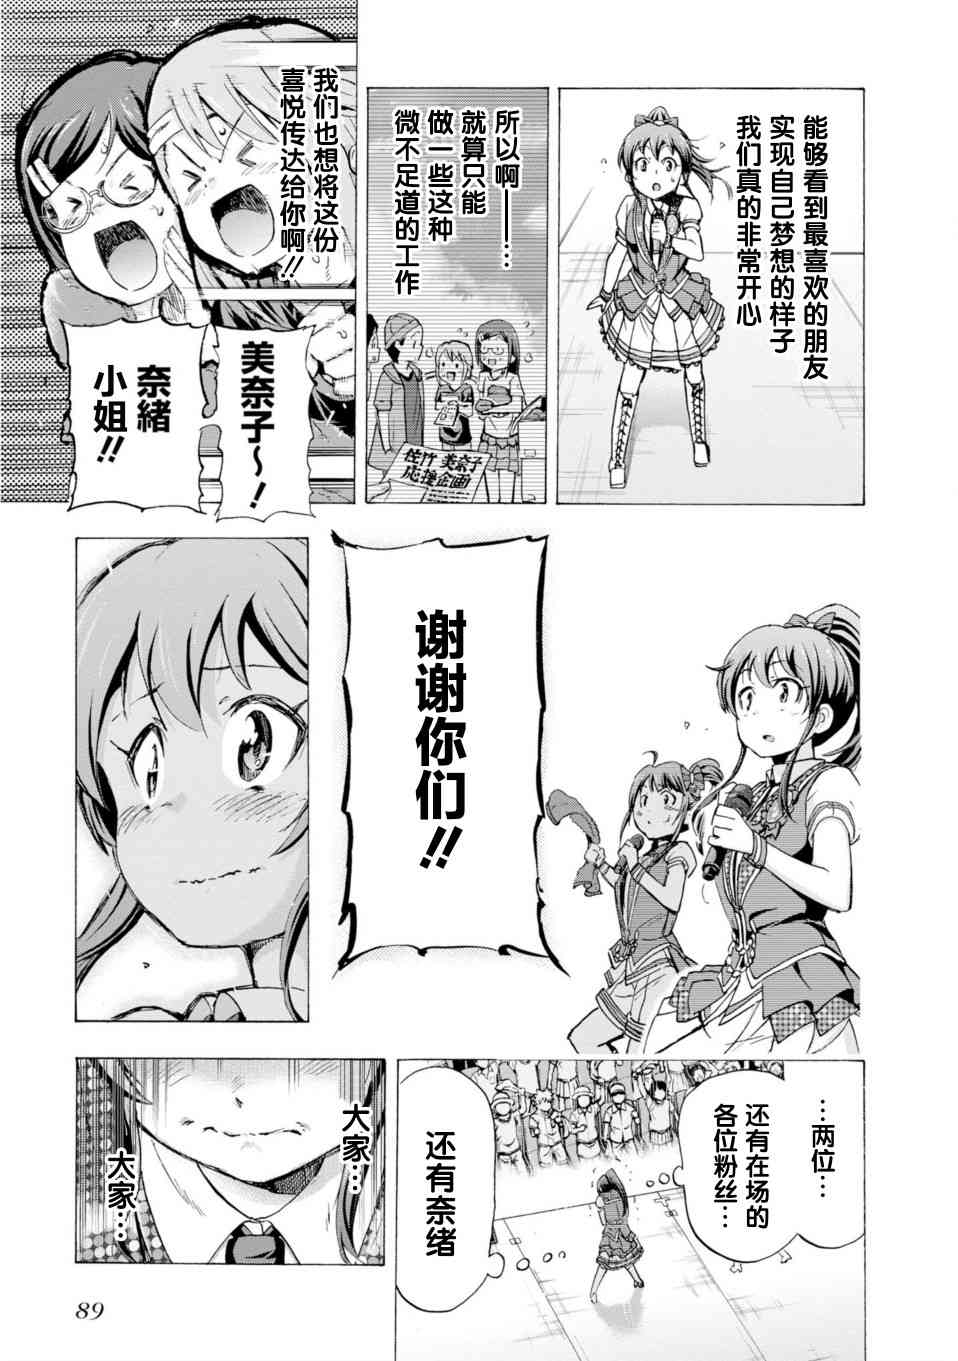 THE IDOLM@STER MILLION LIVE! Blooming Clover - 17話 - 4